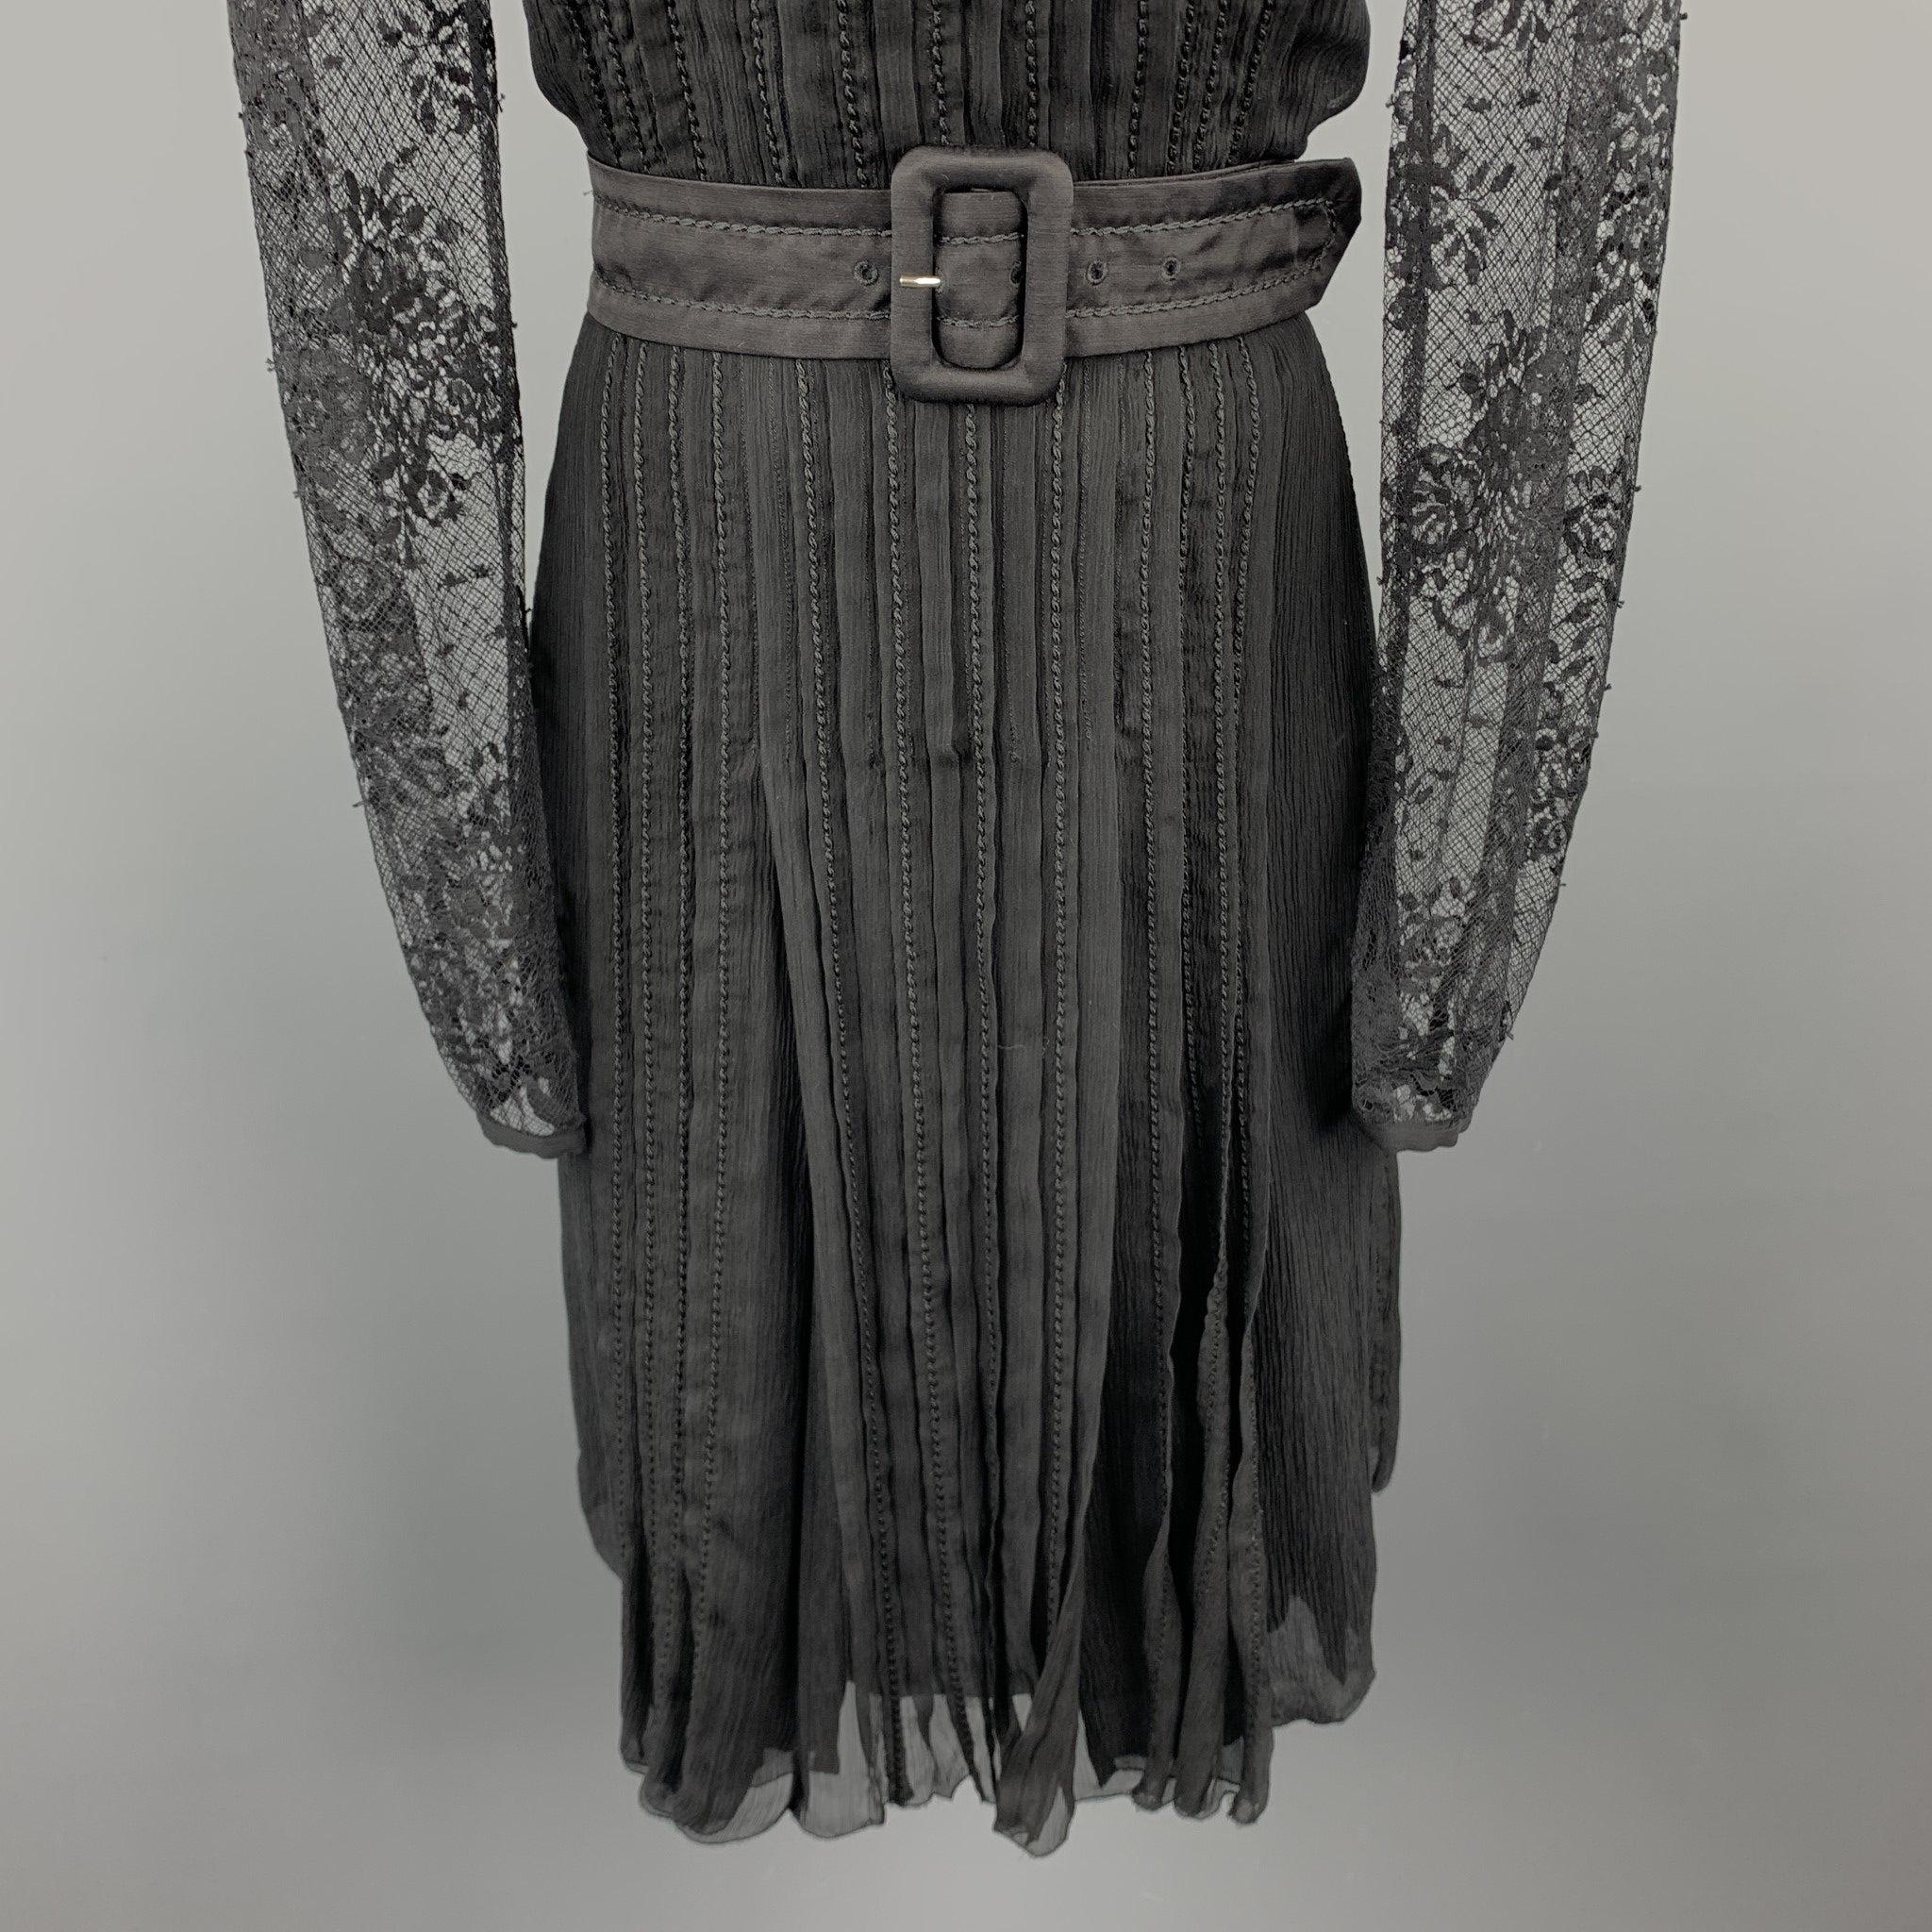 PRADA Size 10 Black Pleated Silk Lace Top Long Sleeve Cocktail Dress In Good Condition For Sale In San Francisco, CA